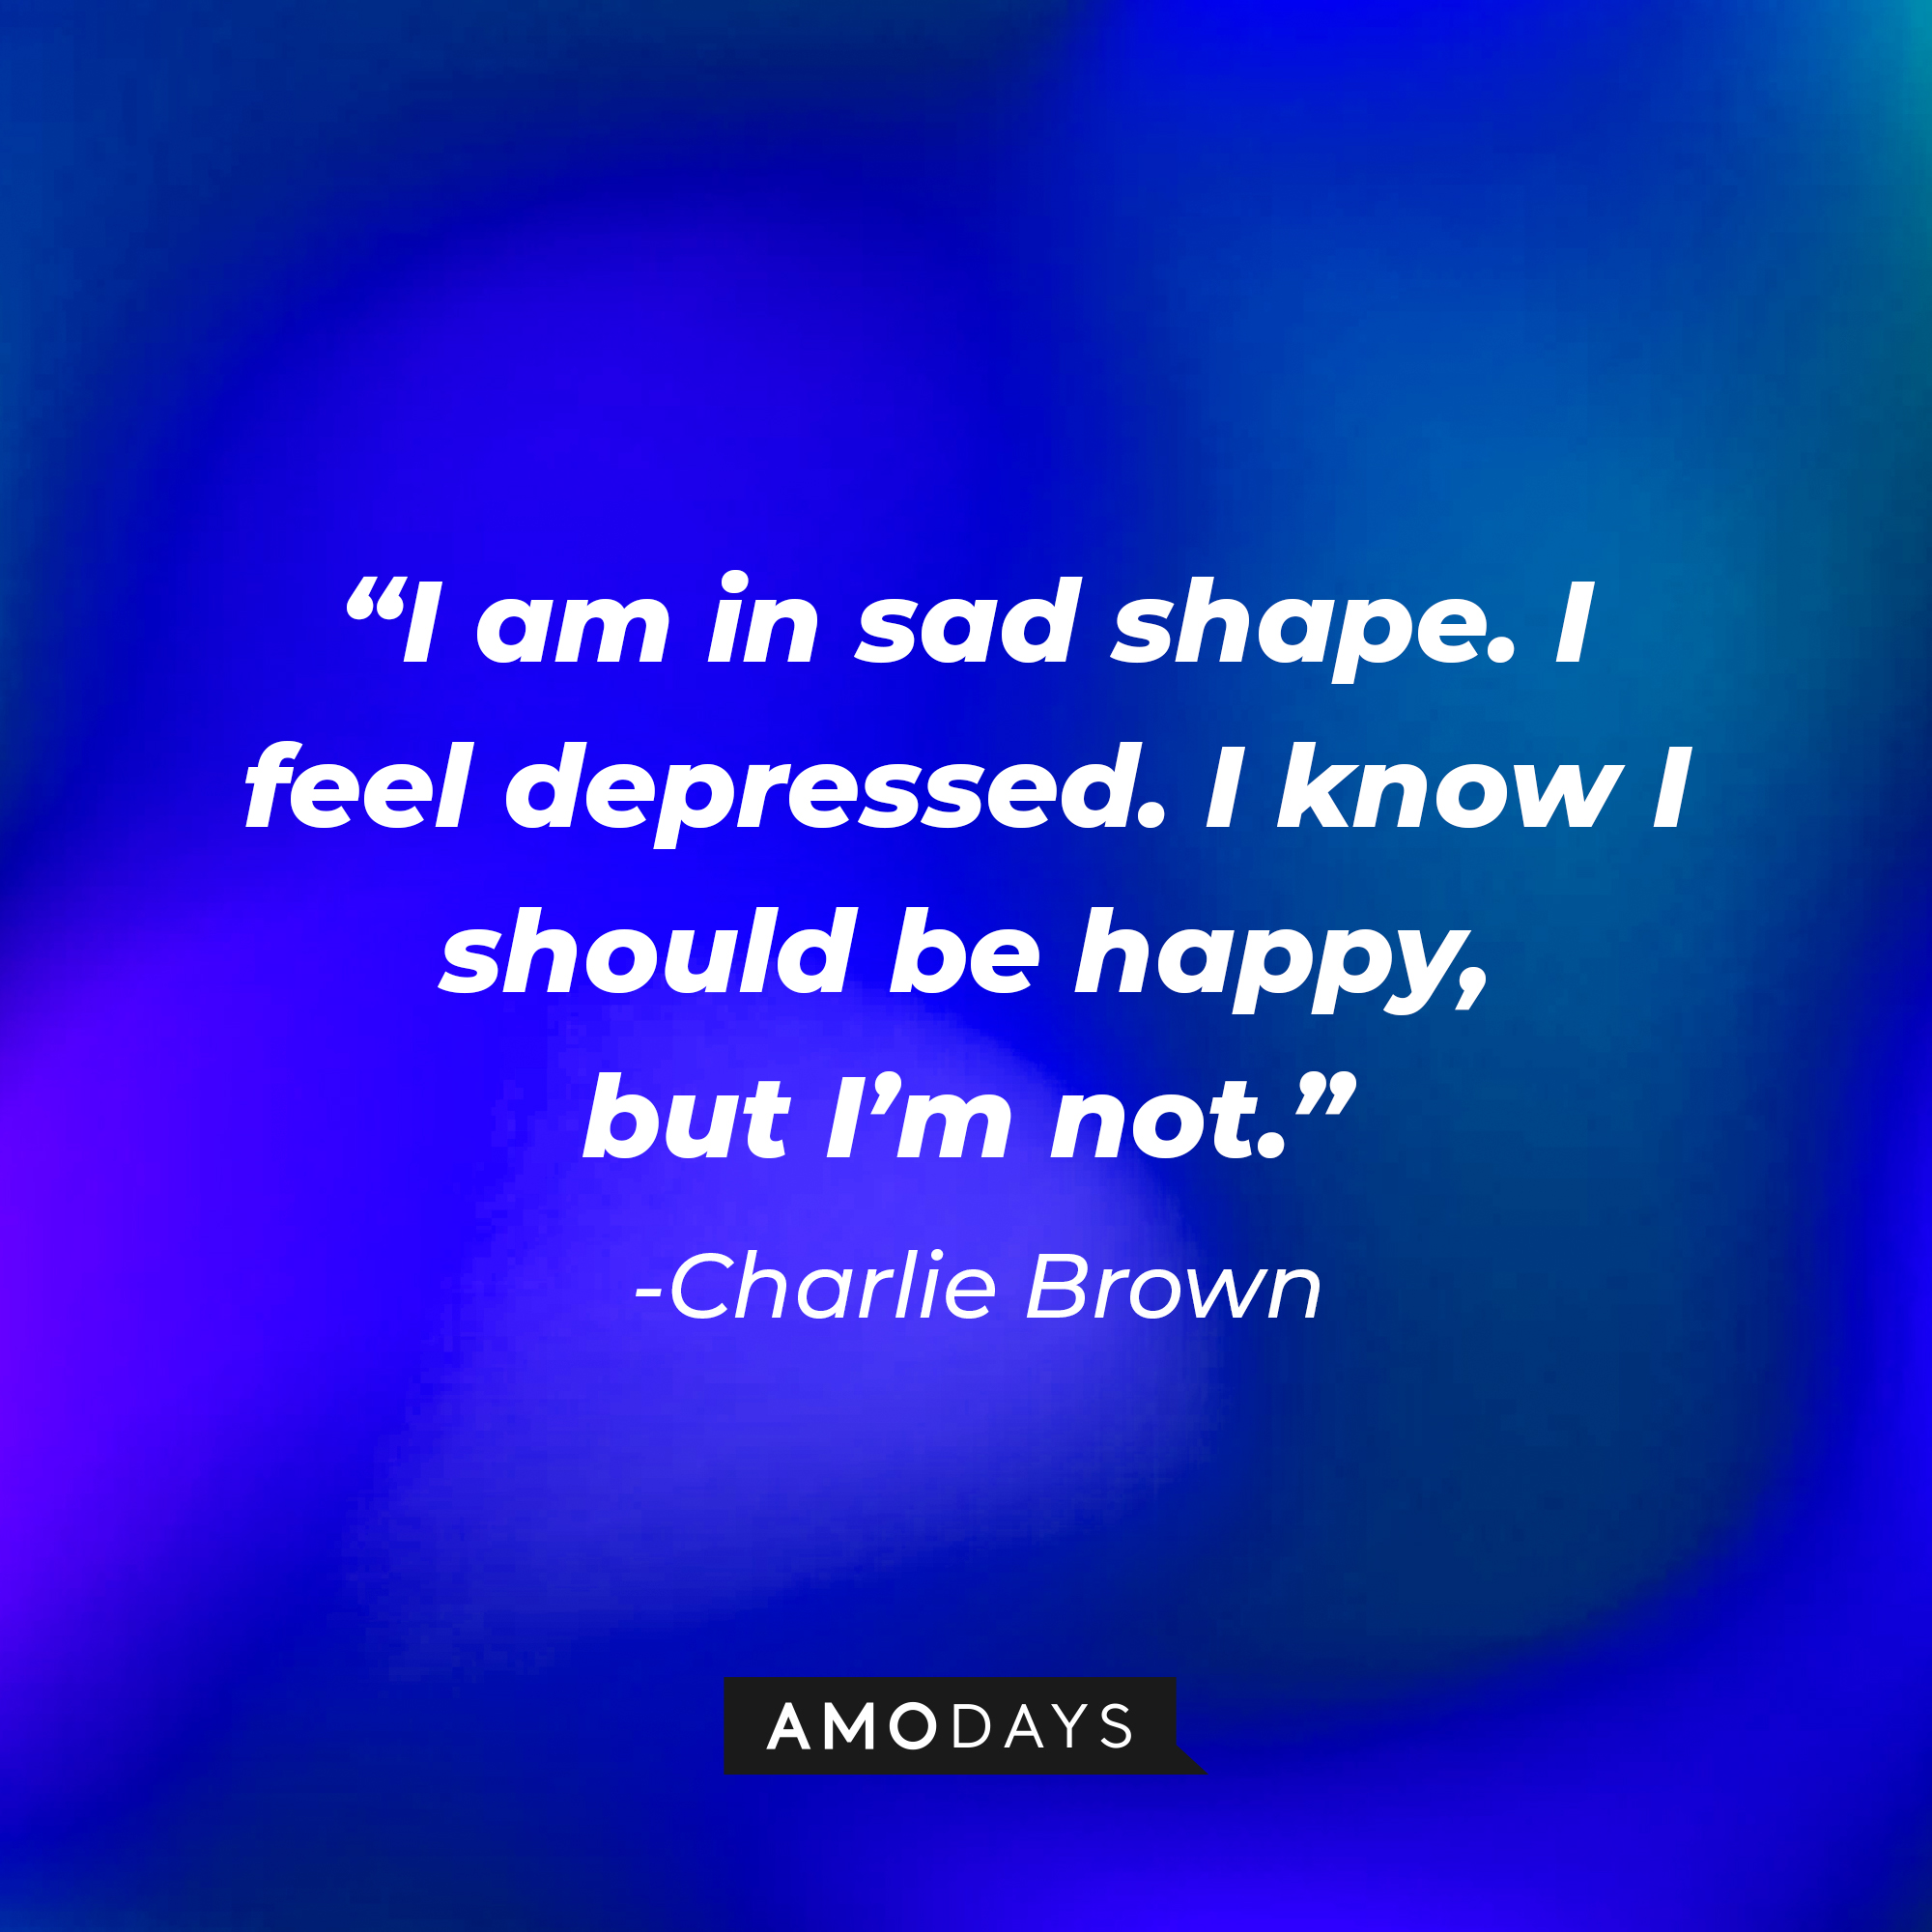 Charlie Brown's quote: "I am in sad shape. I feel depressed. I know I should be happy, but I’m not." | Source: Amodays